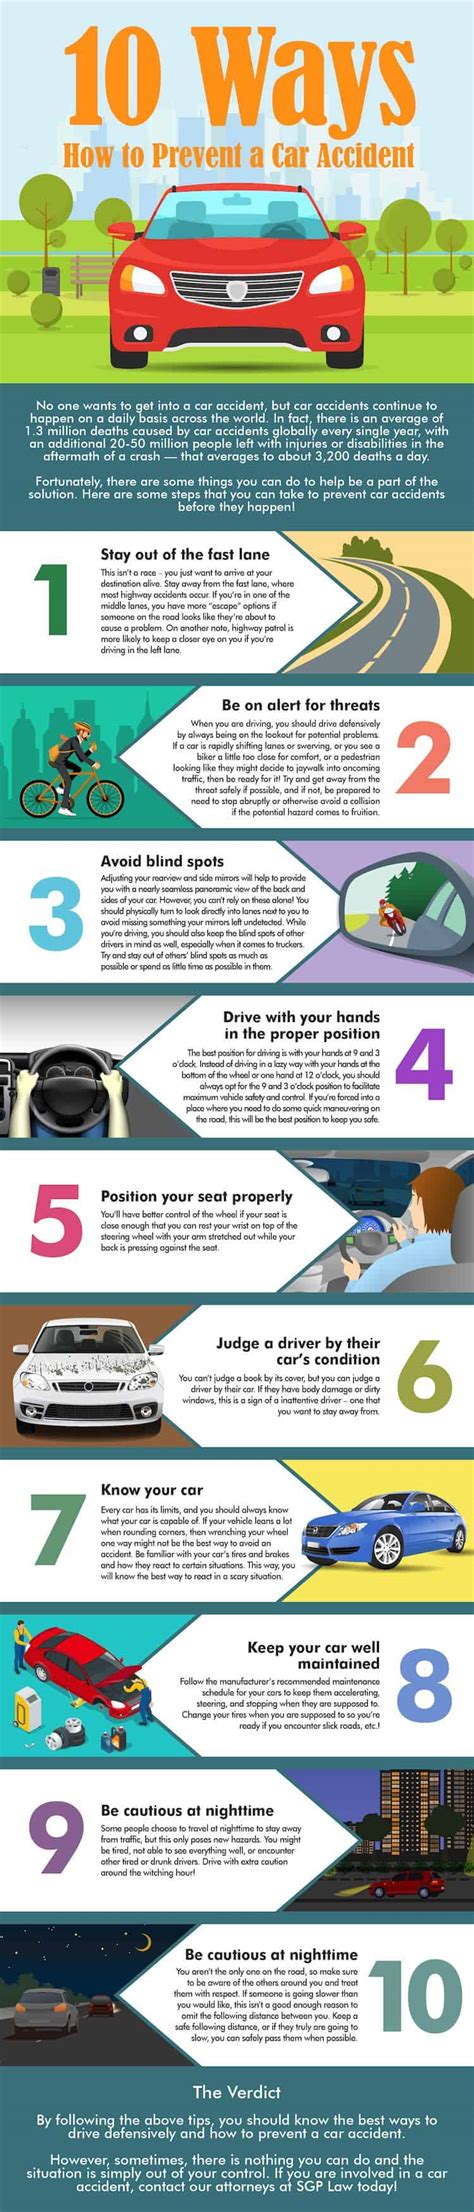 10 Ways To Prevent A Car Accident And Stay Safe